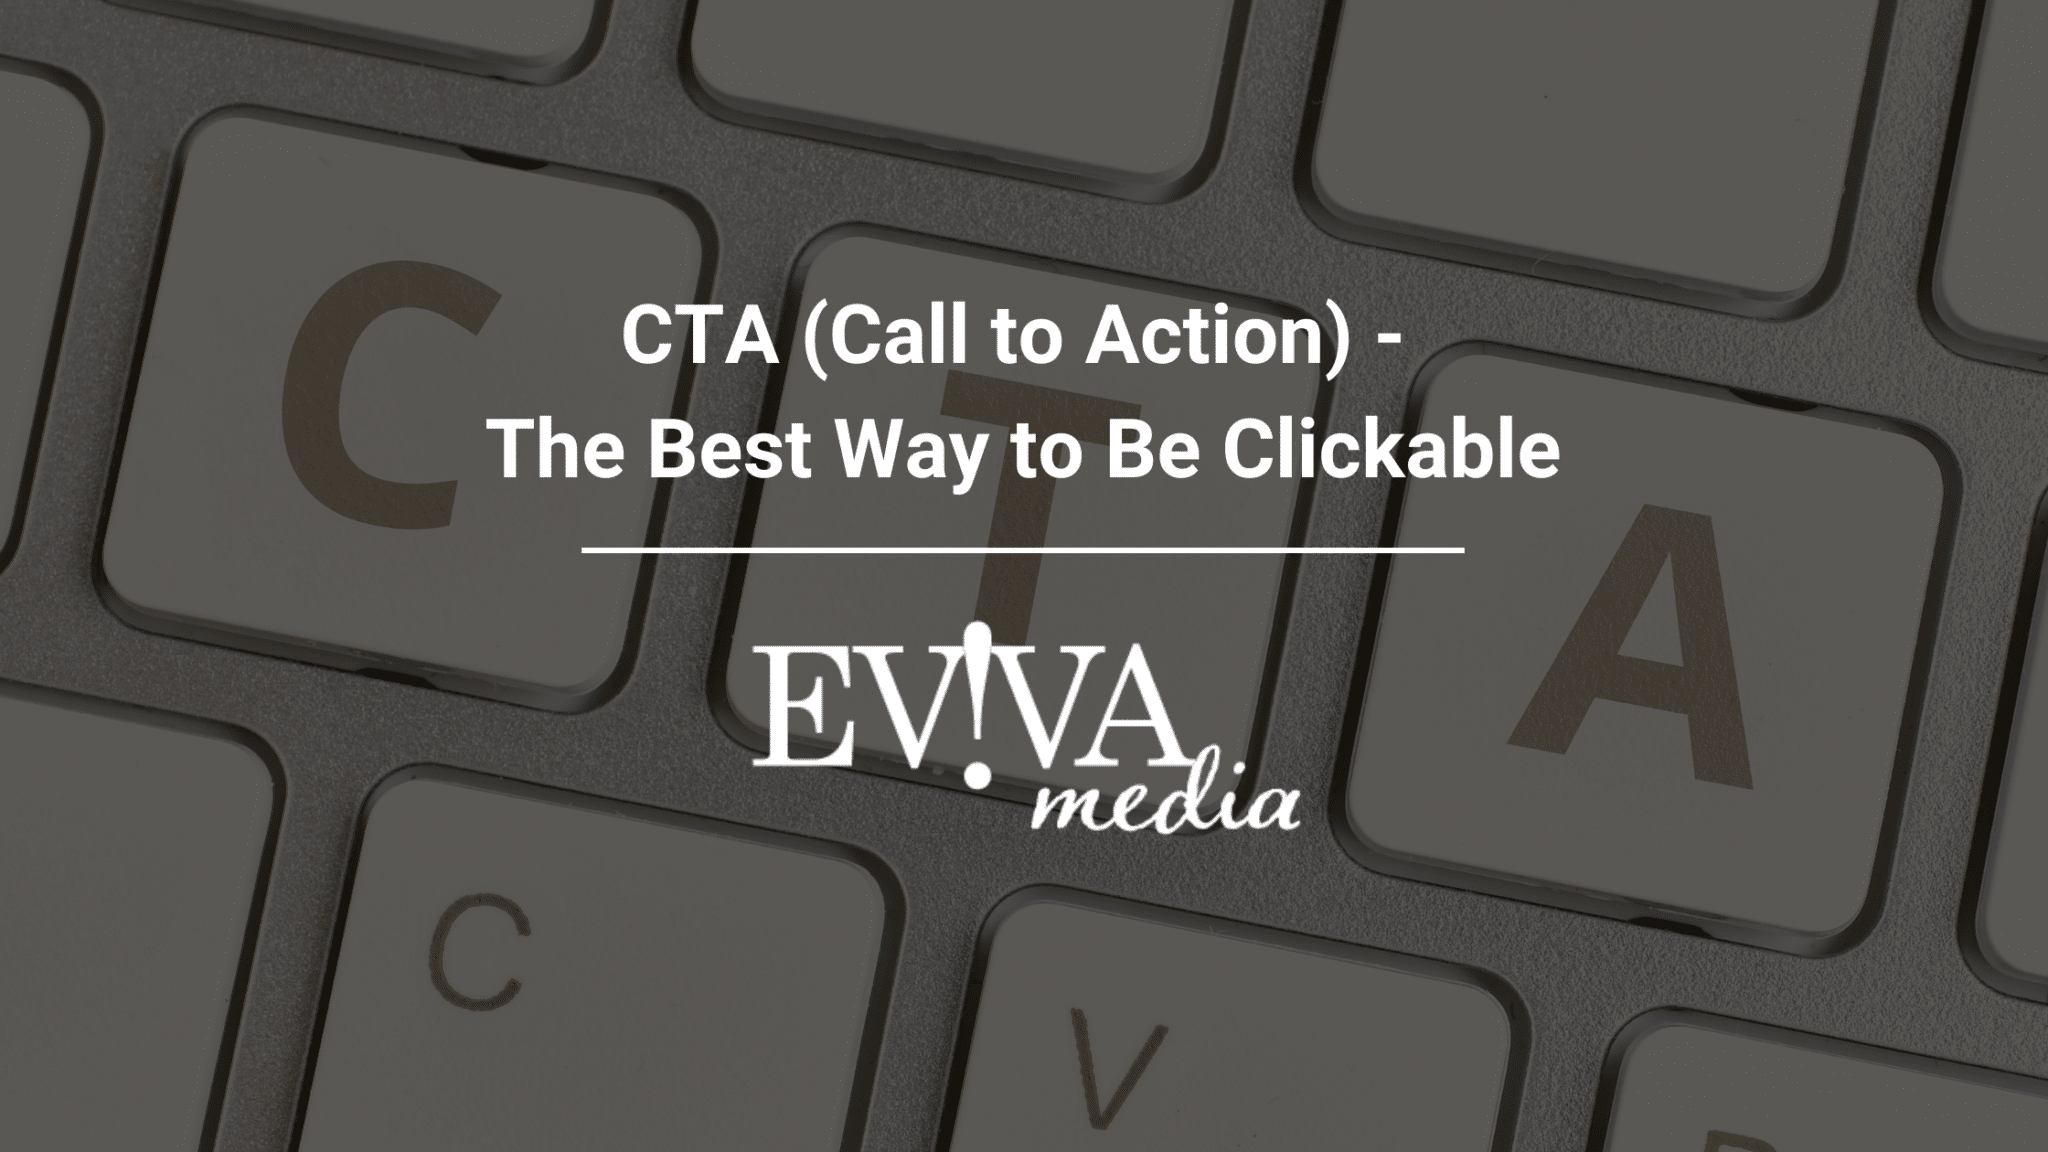 This image shows a keyboard with text overlay reading "CTA (Call to Action) - The Best Way to Be Clickable" and the white logo "EVIVA media."